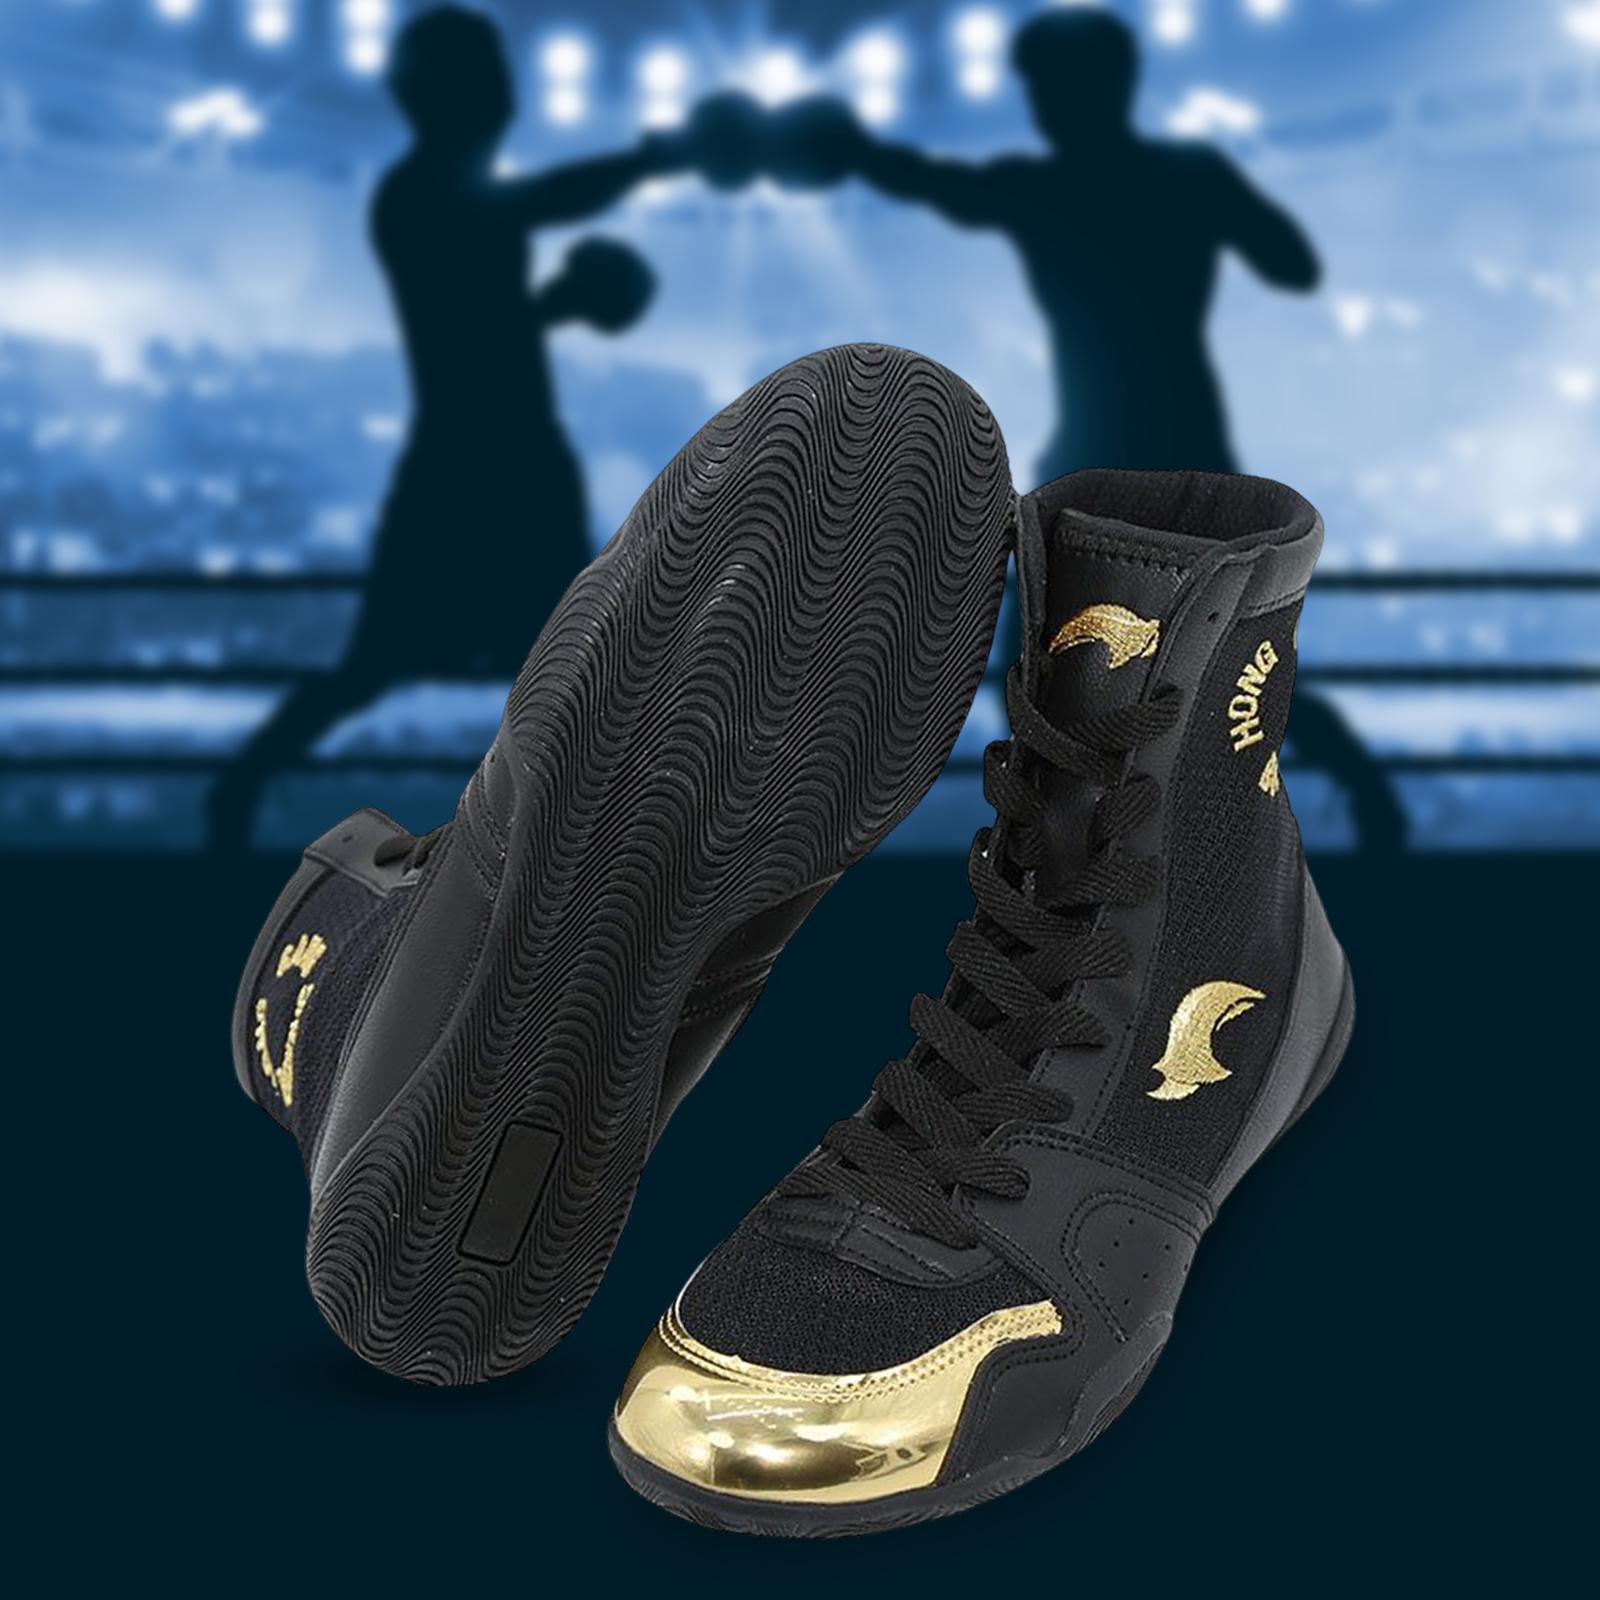 Kick Boxing Shoes Wrestling Boots Practice for Grappling Taekwondo Mma 39